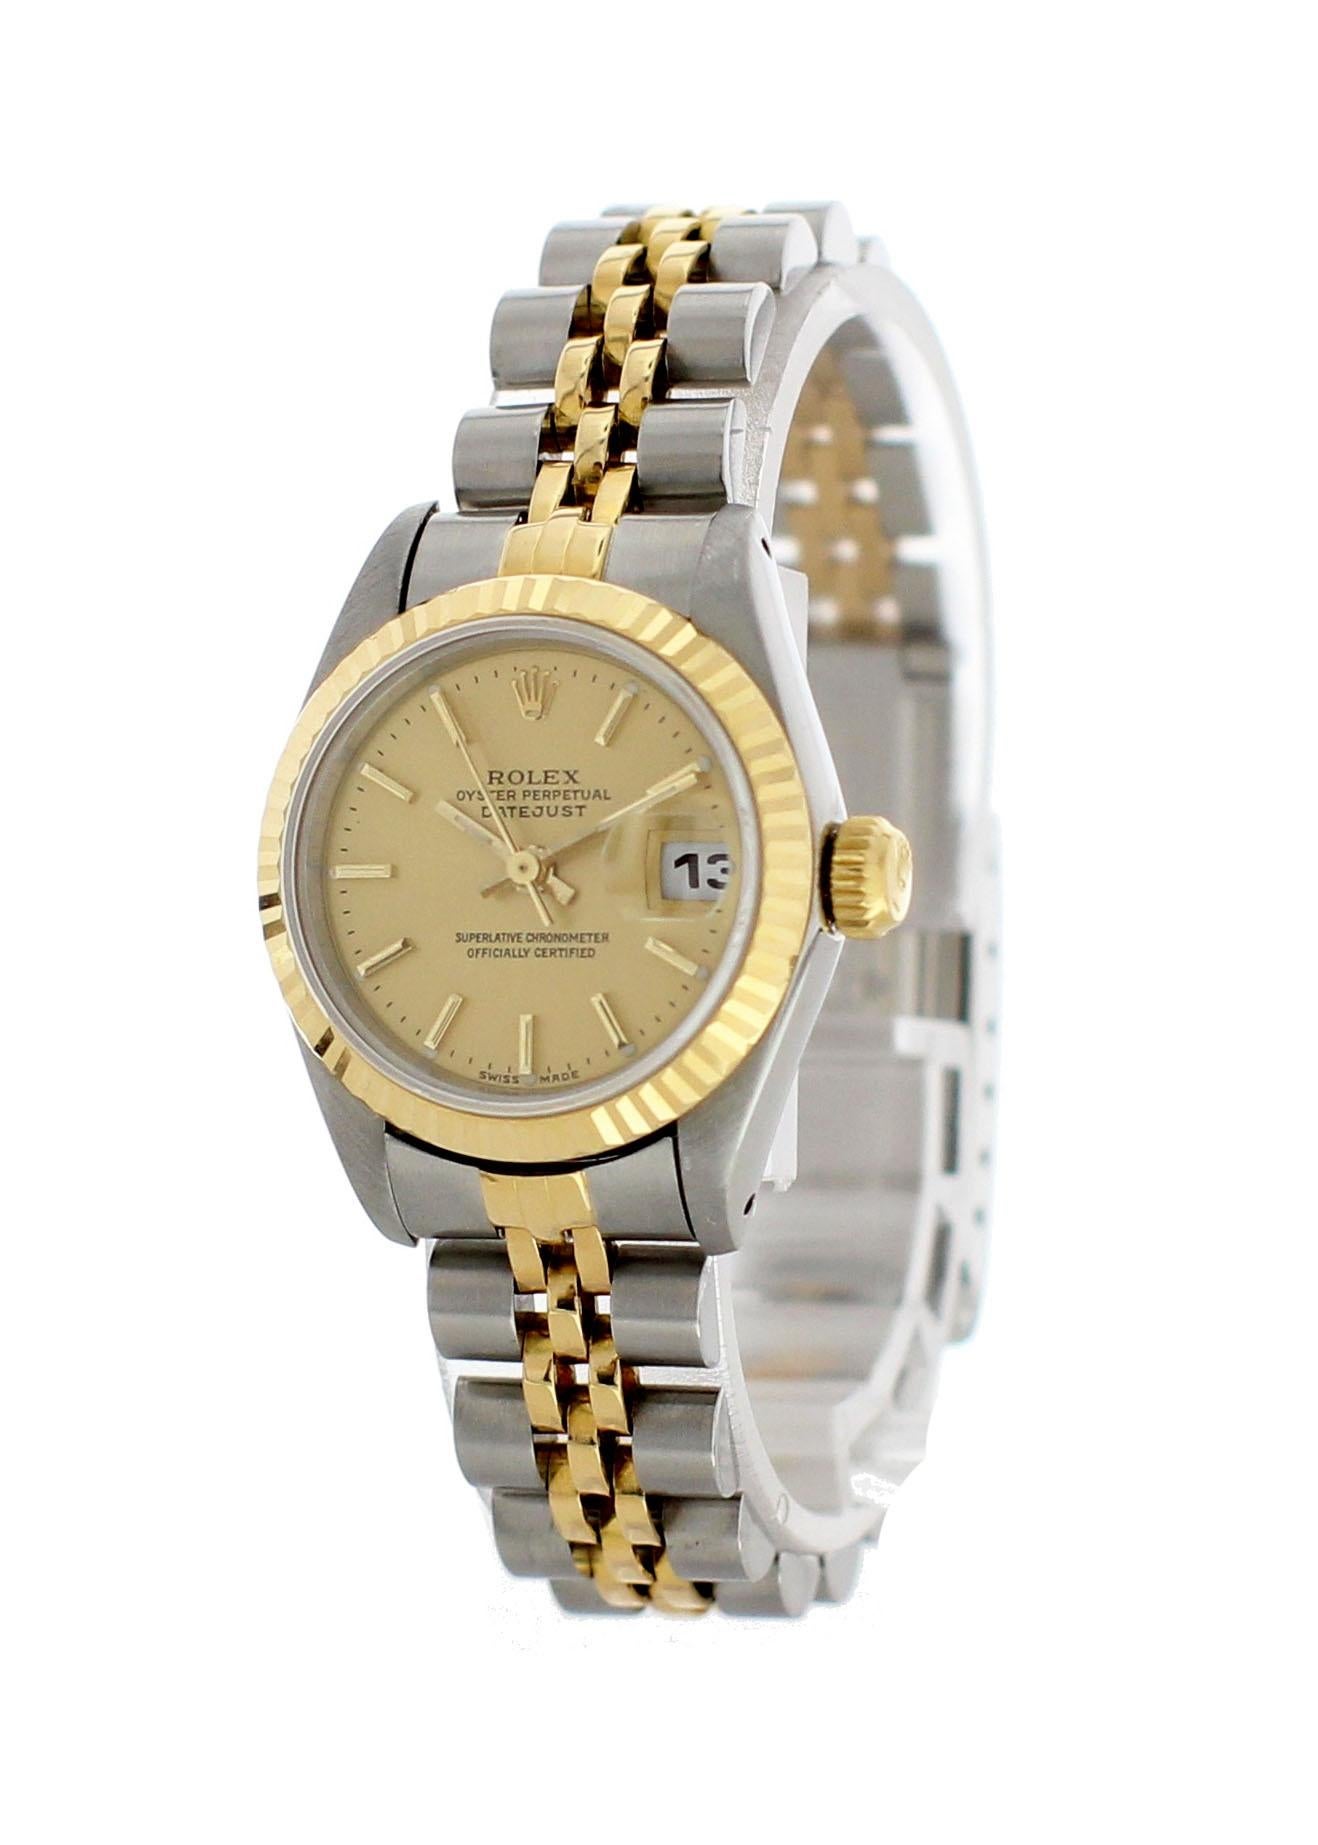 Ladies Rolex Oyster Perpetual Datejust 69173. 26 mm stainless steel case. 18k yellow gold fluted bezel. Champagne dial with yellow gold hands and stick markers. 18k yellow gold and stainless steel Jubilee band with a stainless steel fold-over clasp.